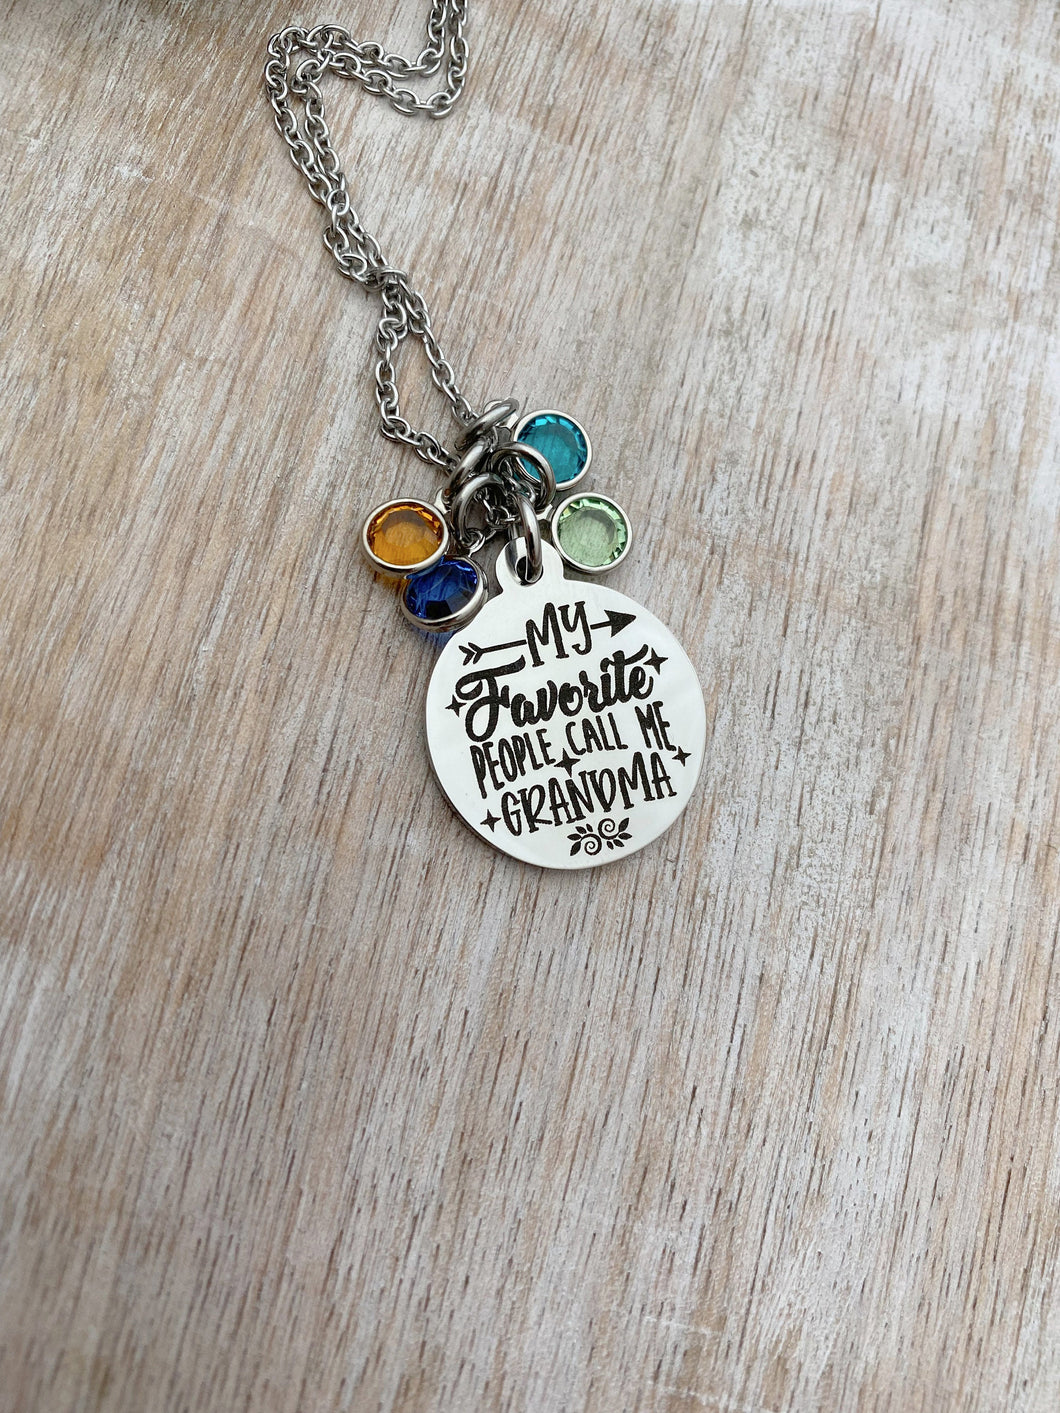 my favorite people call me grandma - Personalized necklace, silver tone stainless steel,  Swarovski crystal birthstones gift for grandma